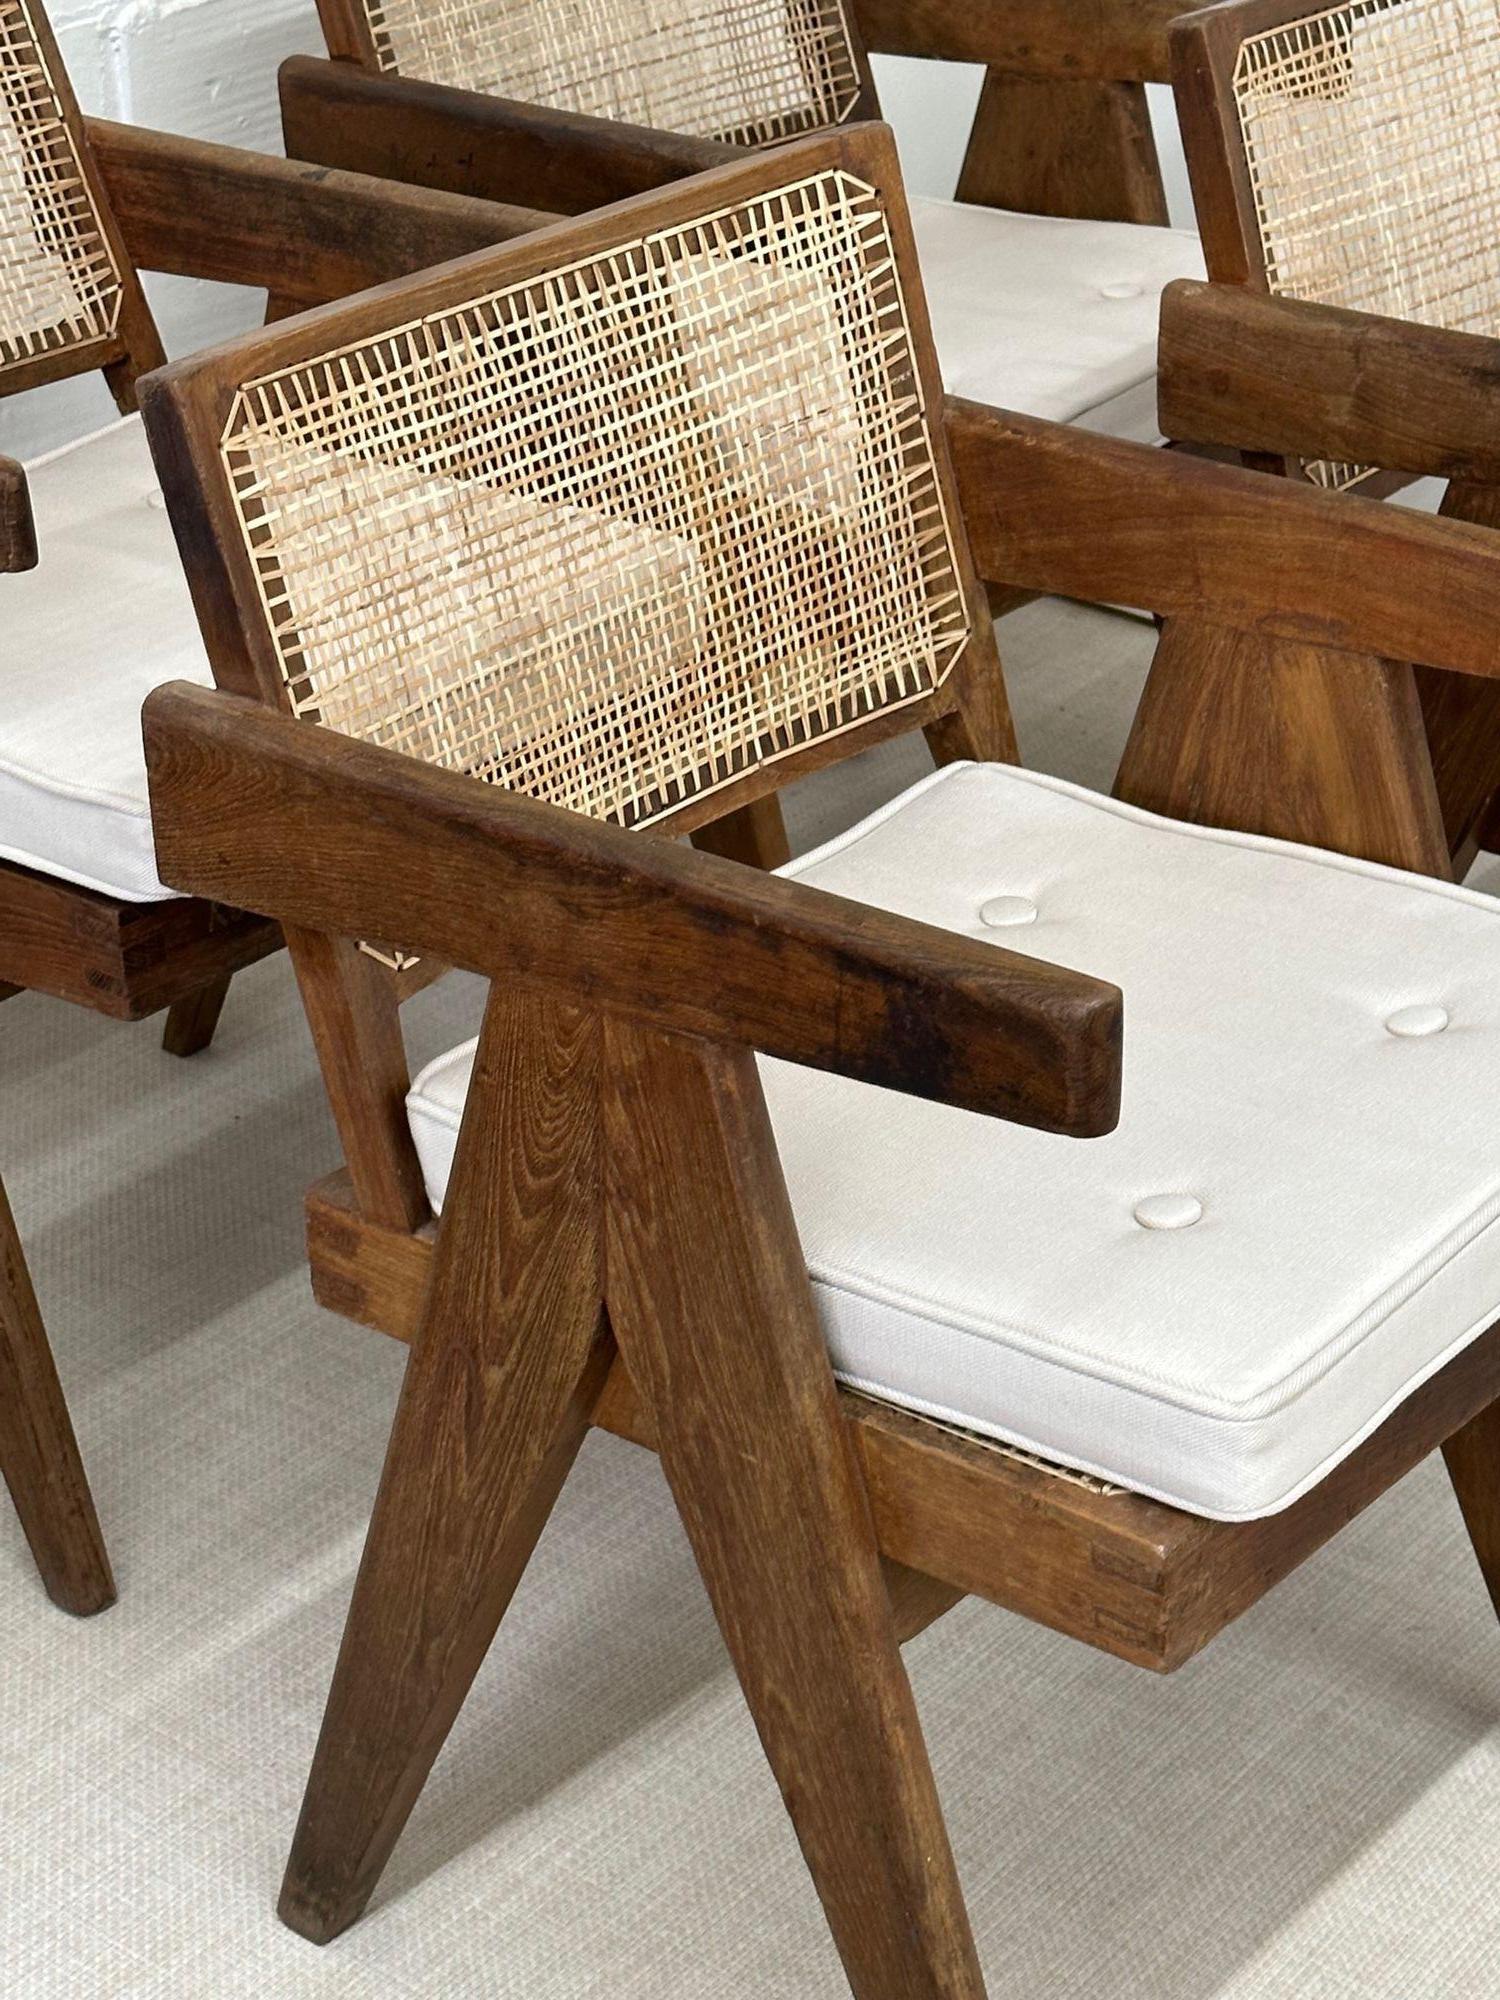 Linen Pierre Jeanneret, Mid-Century Modern, Dining Chairs, Teak, Cane, India, 1960s